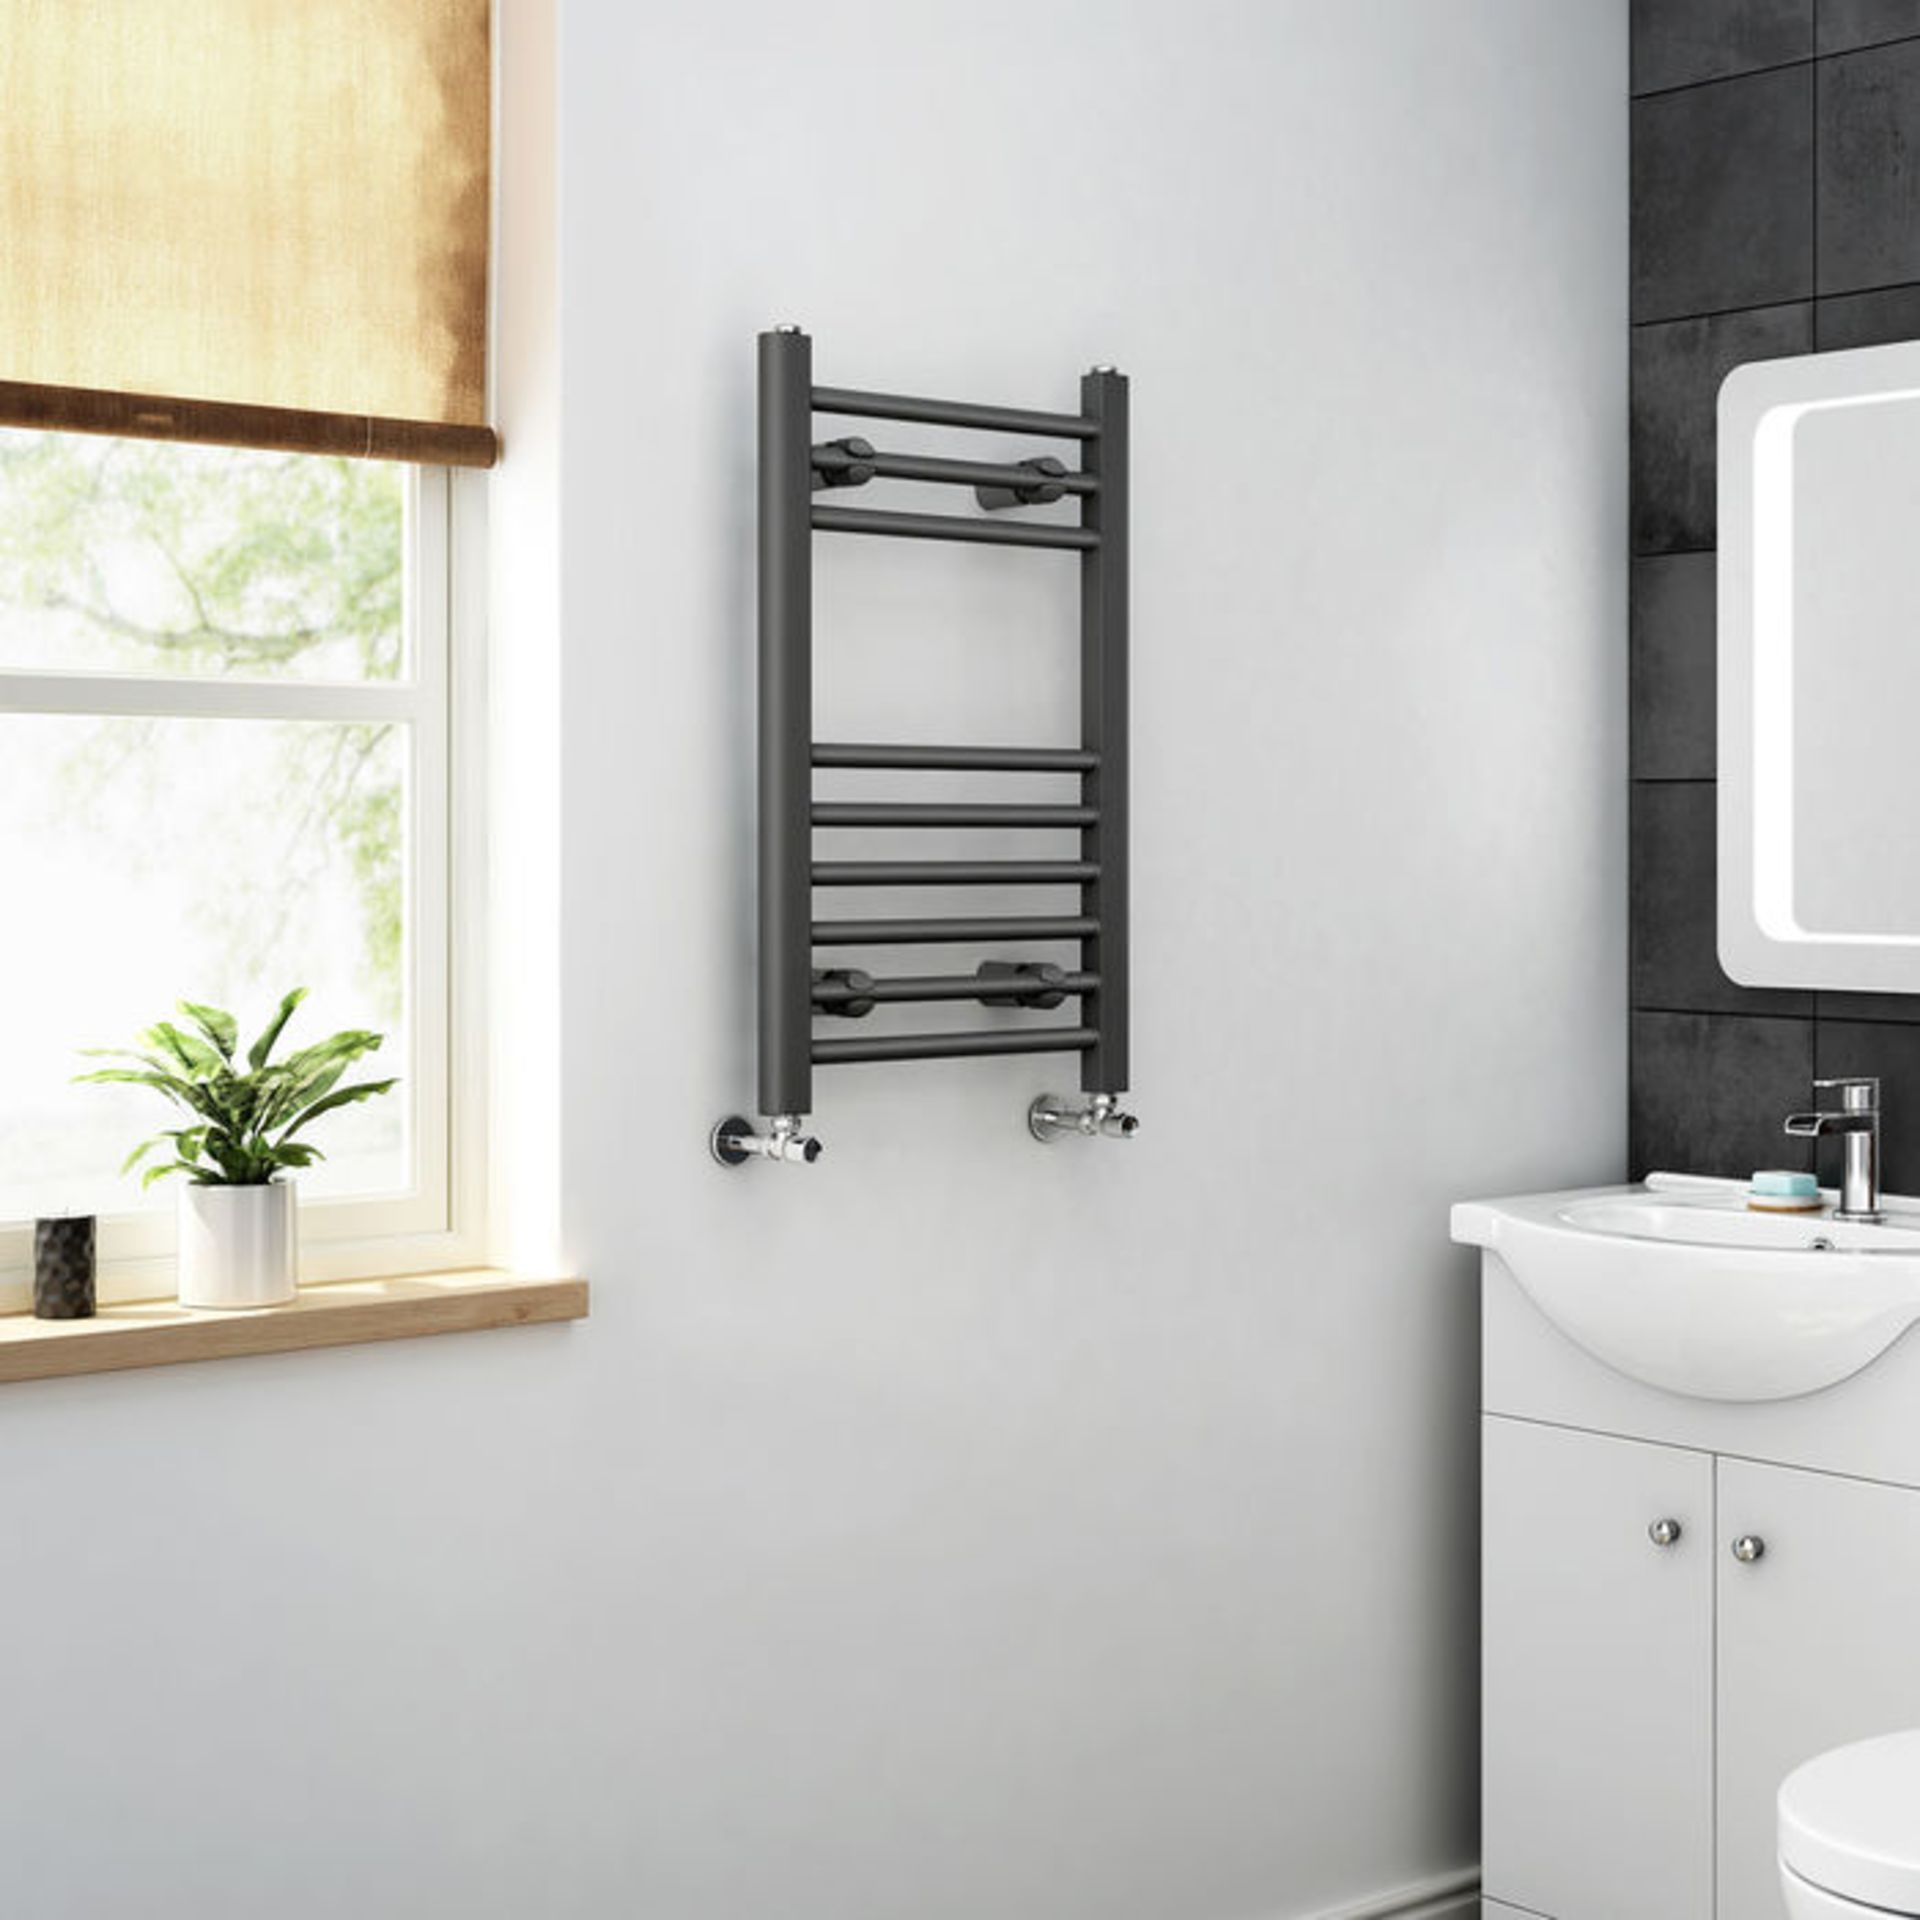 (TY77) 650x400mm - 20mm Tubes - Anthracite Heated Straight Rail Ladder Towel Radiator. Corrosion - Image 2 of 2